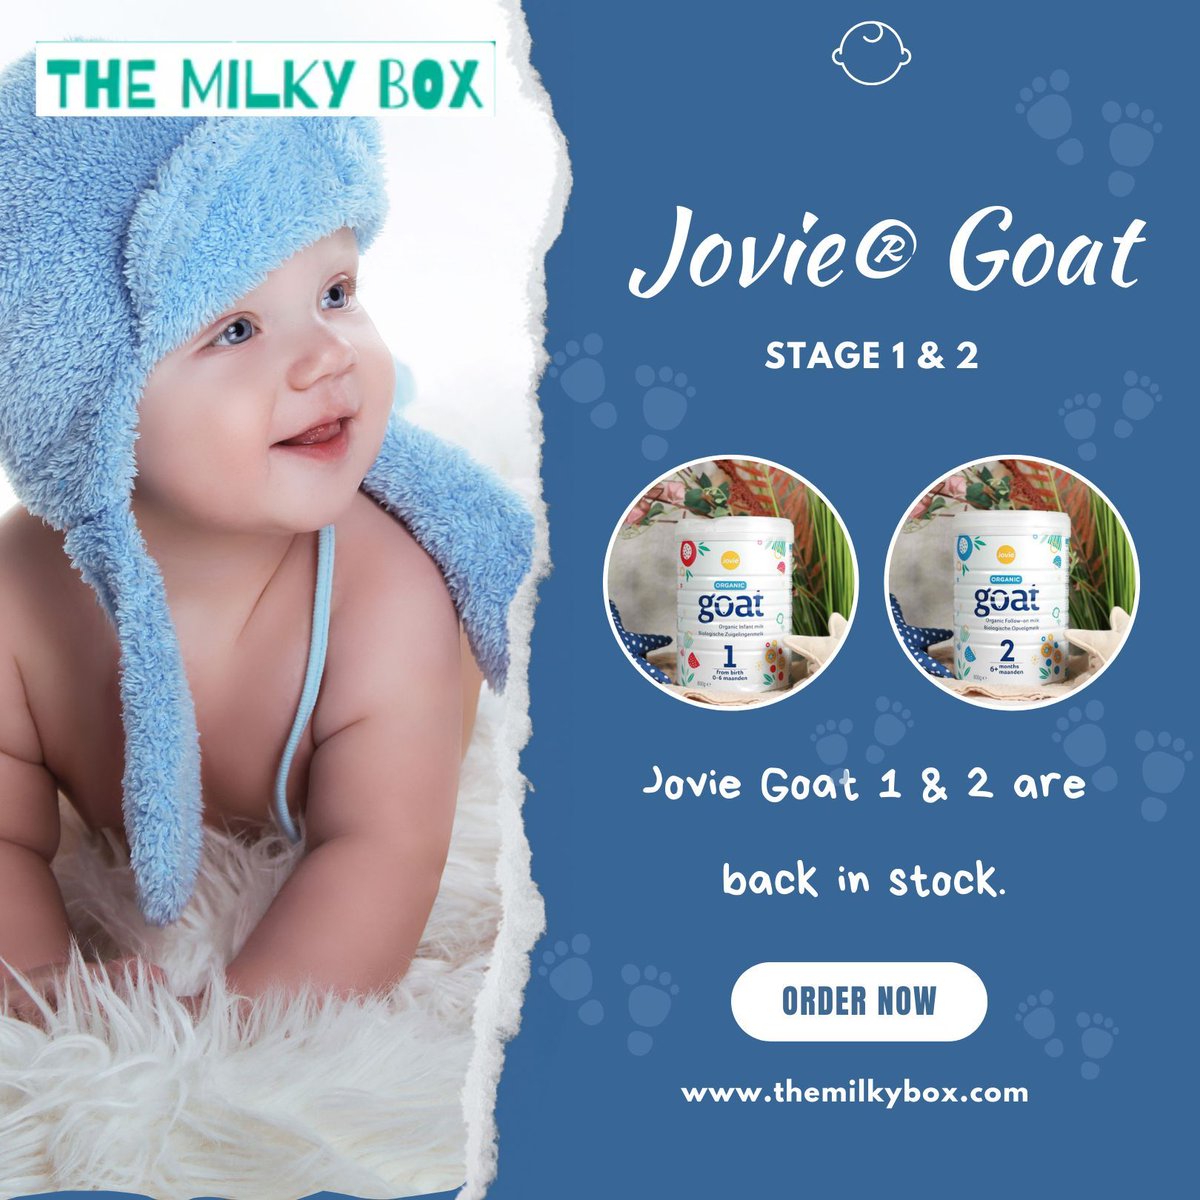 🍼🐐 Exciting News!✨ 𝐉𝐨𝐯𝐢𝐞 𝐆𝐨𝐚𝐭 𝟏 & 𝟐 are Back in Stock! 🍤Embrace the Nutrient-Rich Goodness🍧 and Nourish Your Little🎈 One with Love. 💚👶You'll find everything you need on our website📲buff.ly/3vitH8d 

#breastfeedingmom #baby #parenting #breastmilk #viral